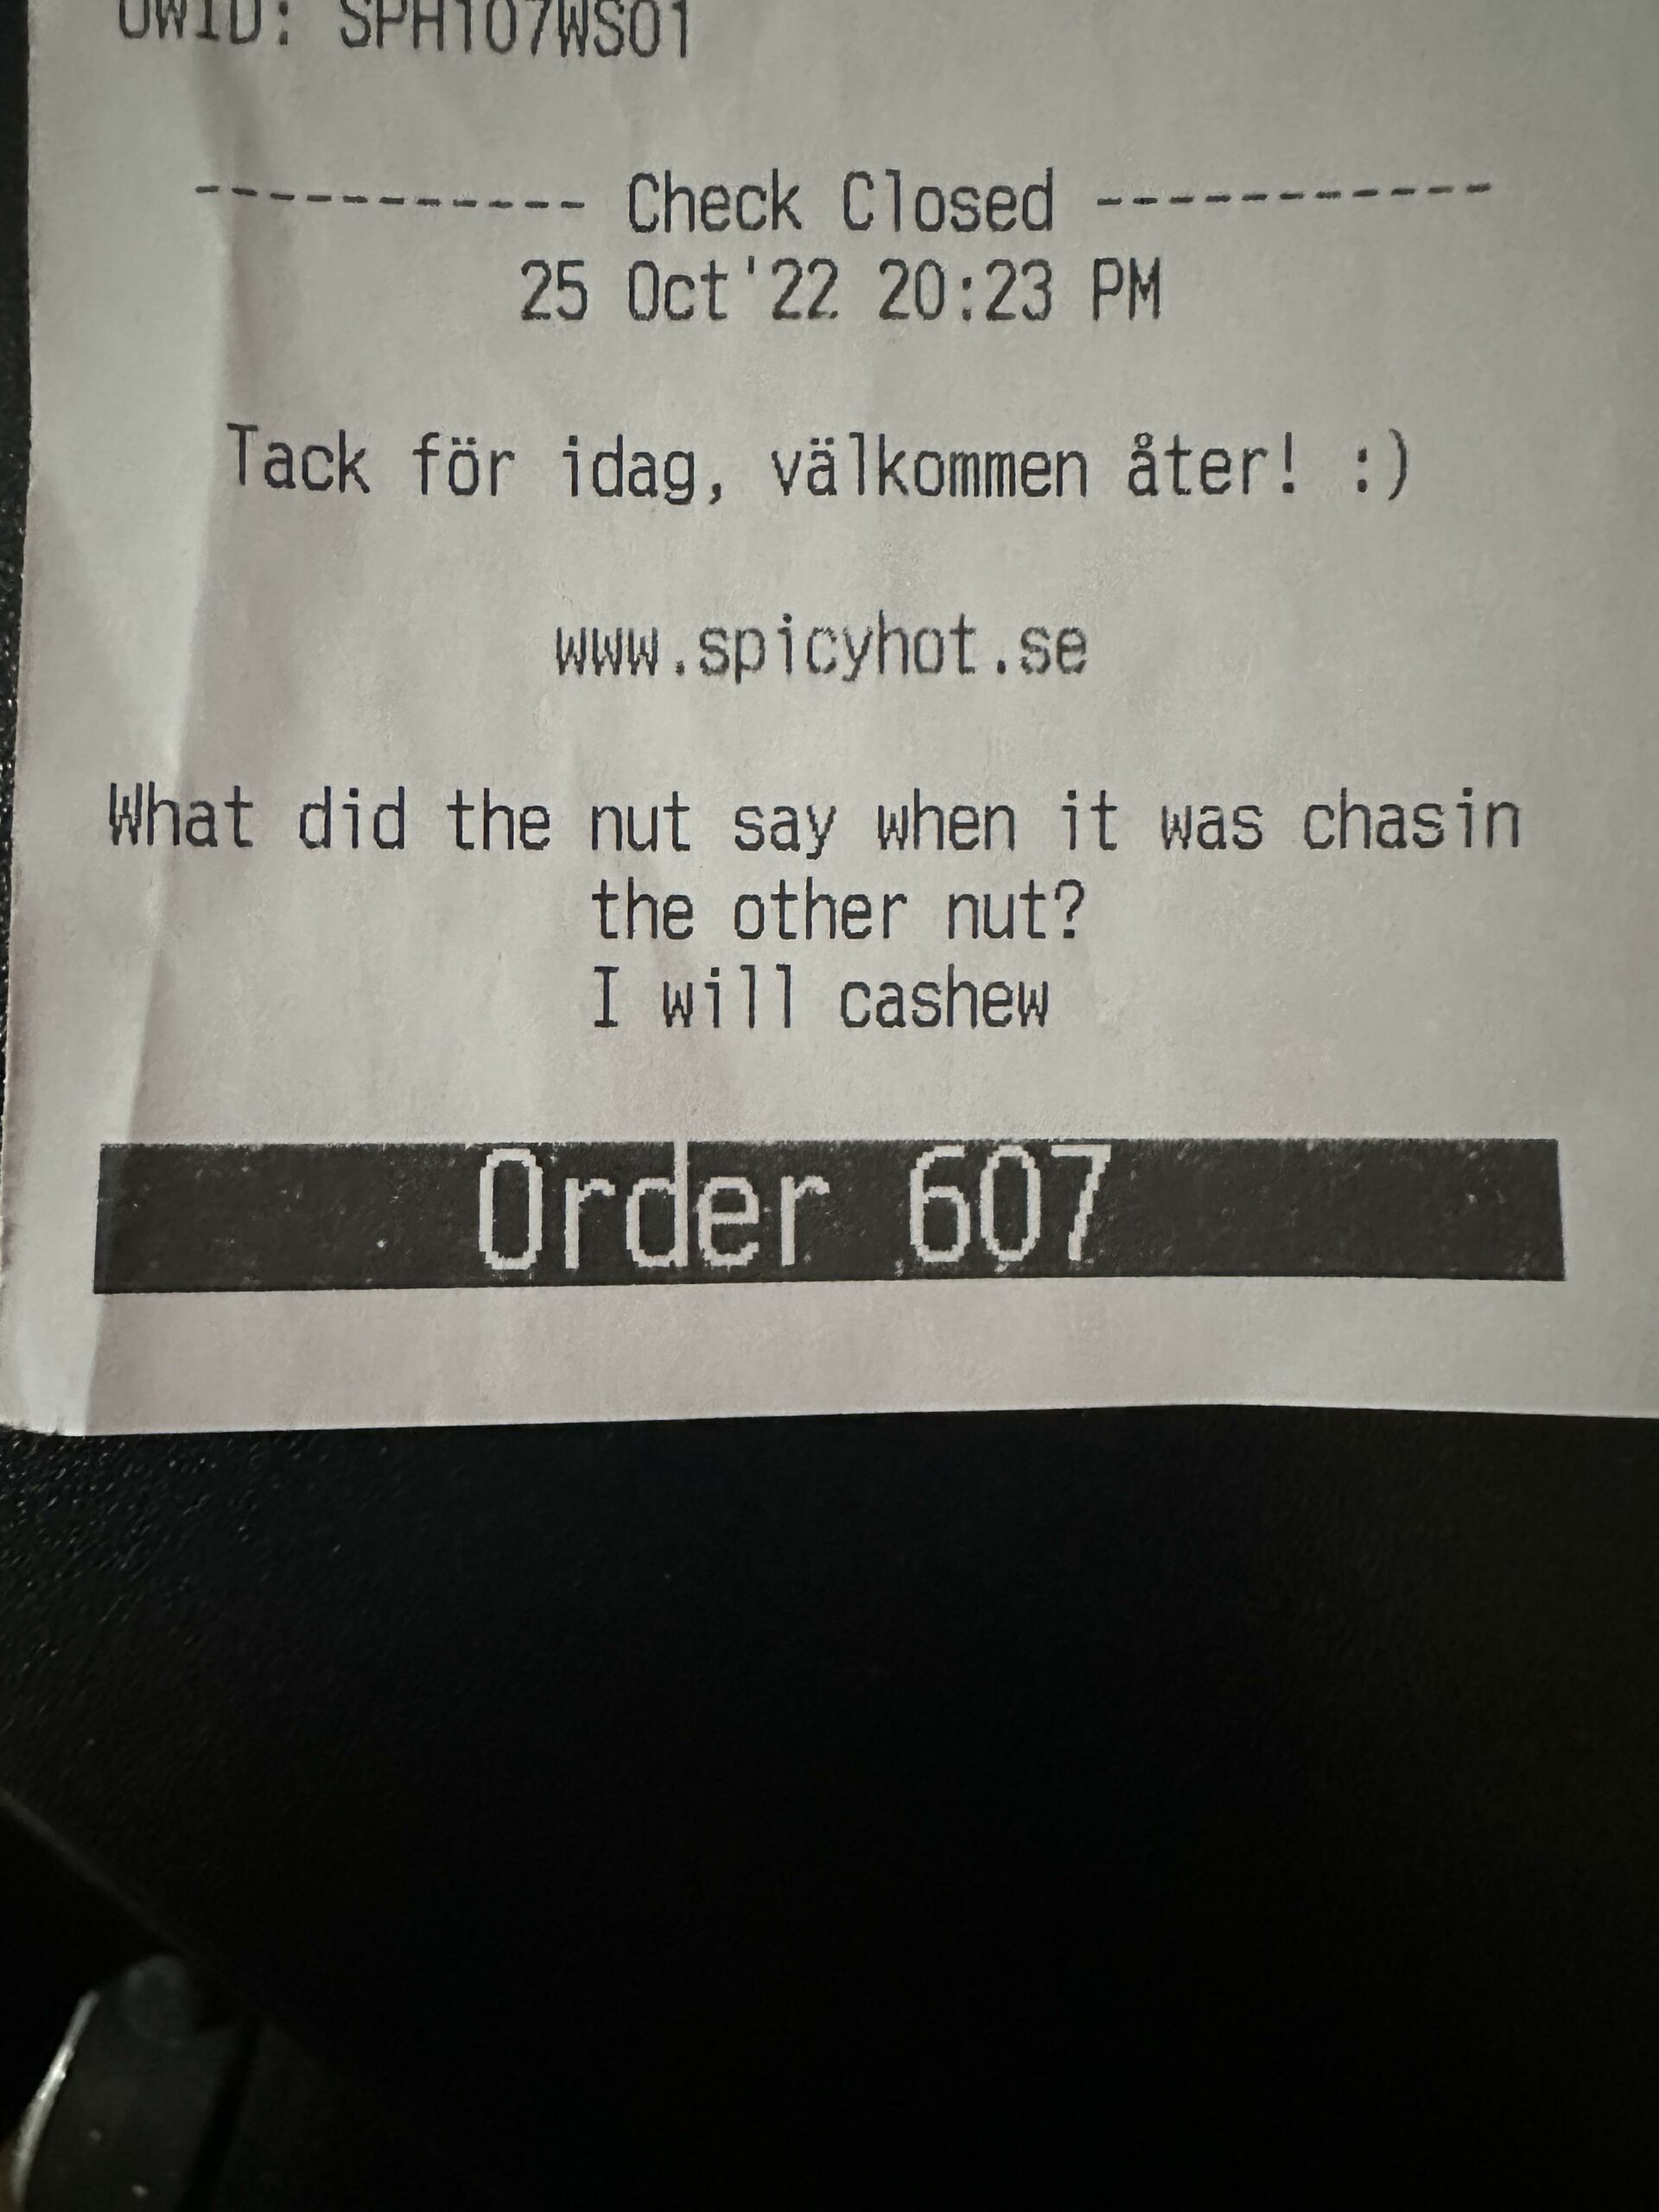 receipt message that says "What did the nut say when it was chasin the other nut? I will cashew."